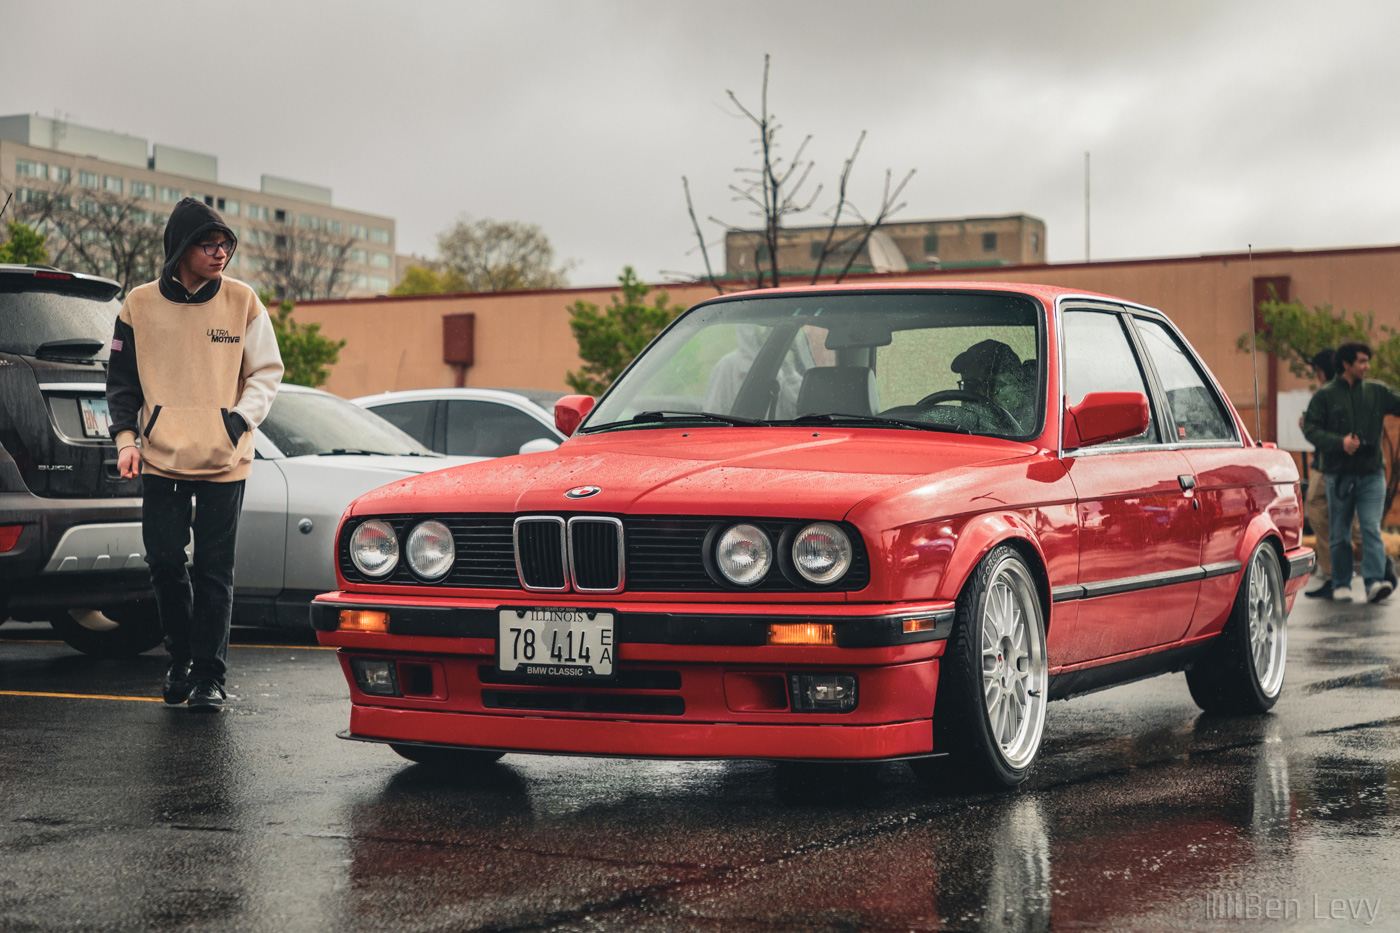 Red BMW E30 Coupe at Rainy Car Meet in Illinois